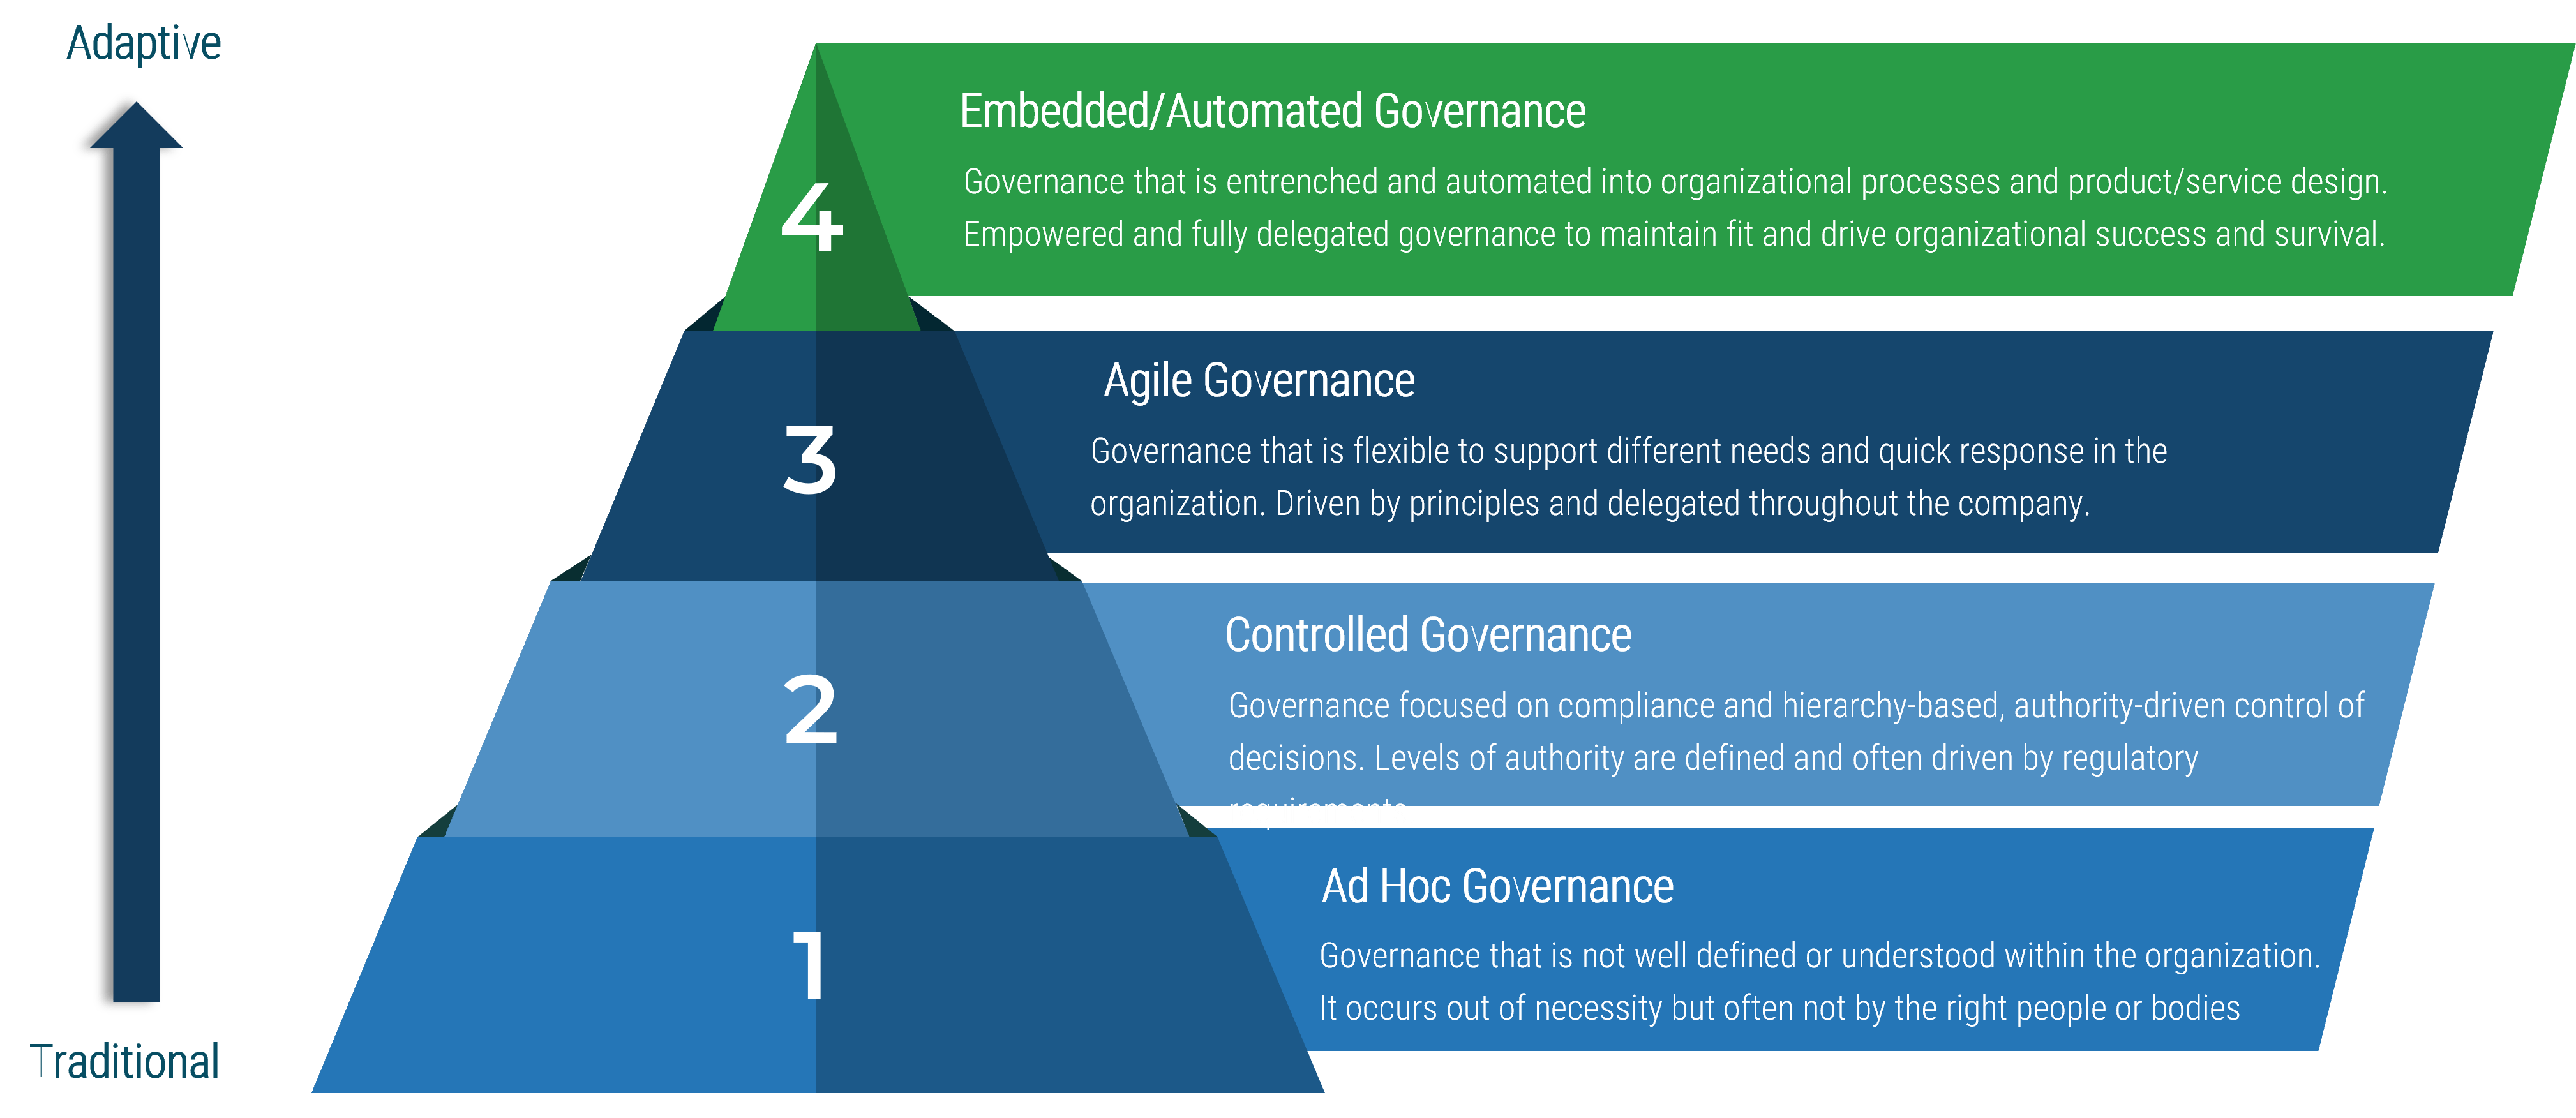 A pyramid of governance styles beginning with the more 'Traditional' at the bottom and 'Adaptive' at the top. From the bottom, '1- Ad Hoc Governance: Governance that is not well defined or understood within the organization. It occurs out of necessity but often not by the right people or bodies', '2- Controlled Governance: Governance focused on compliance and hierarchy-based, authority-driven control of decisions. Levels of authority are defined and often driven by regulatory requirements.', '3- Agile Governance: Governance that is flexible to support different needs and quick response in the organization. Driven by principles and delegated throughout the company.', '4- Embedded/Automated Governance: Governance that is entrenched and automated into organizational processes and product/service design. Empowered and fully delegated governance to maintain fit and drive organizational success and survival.'.